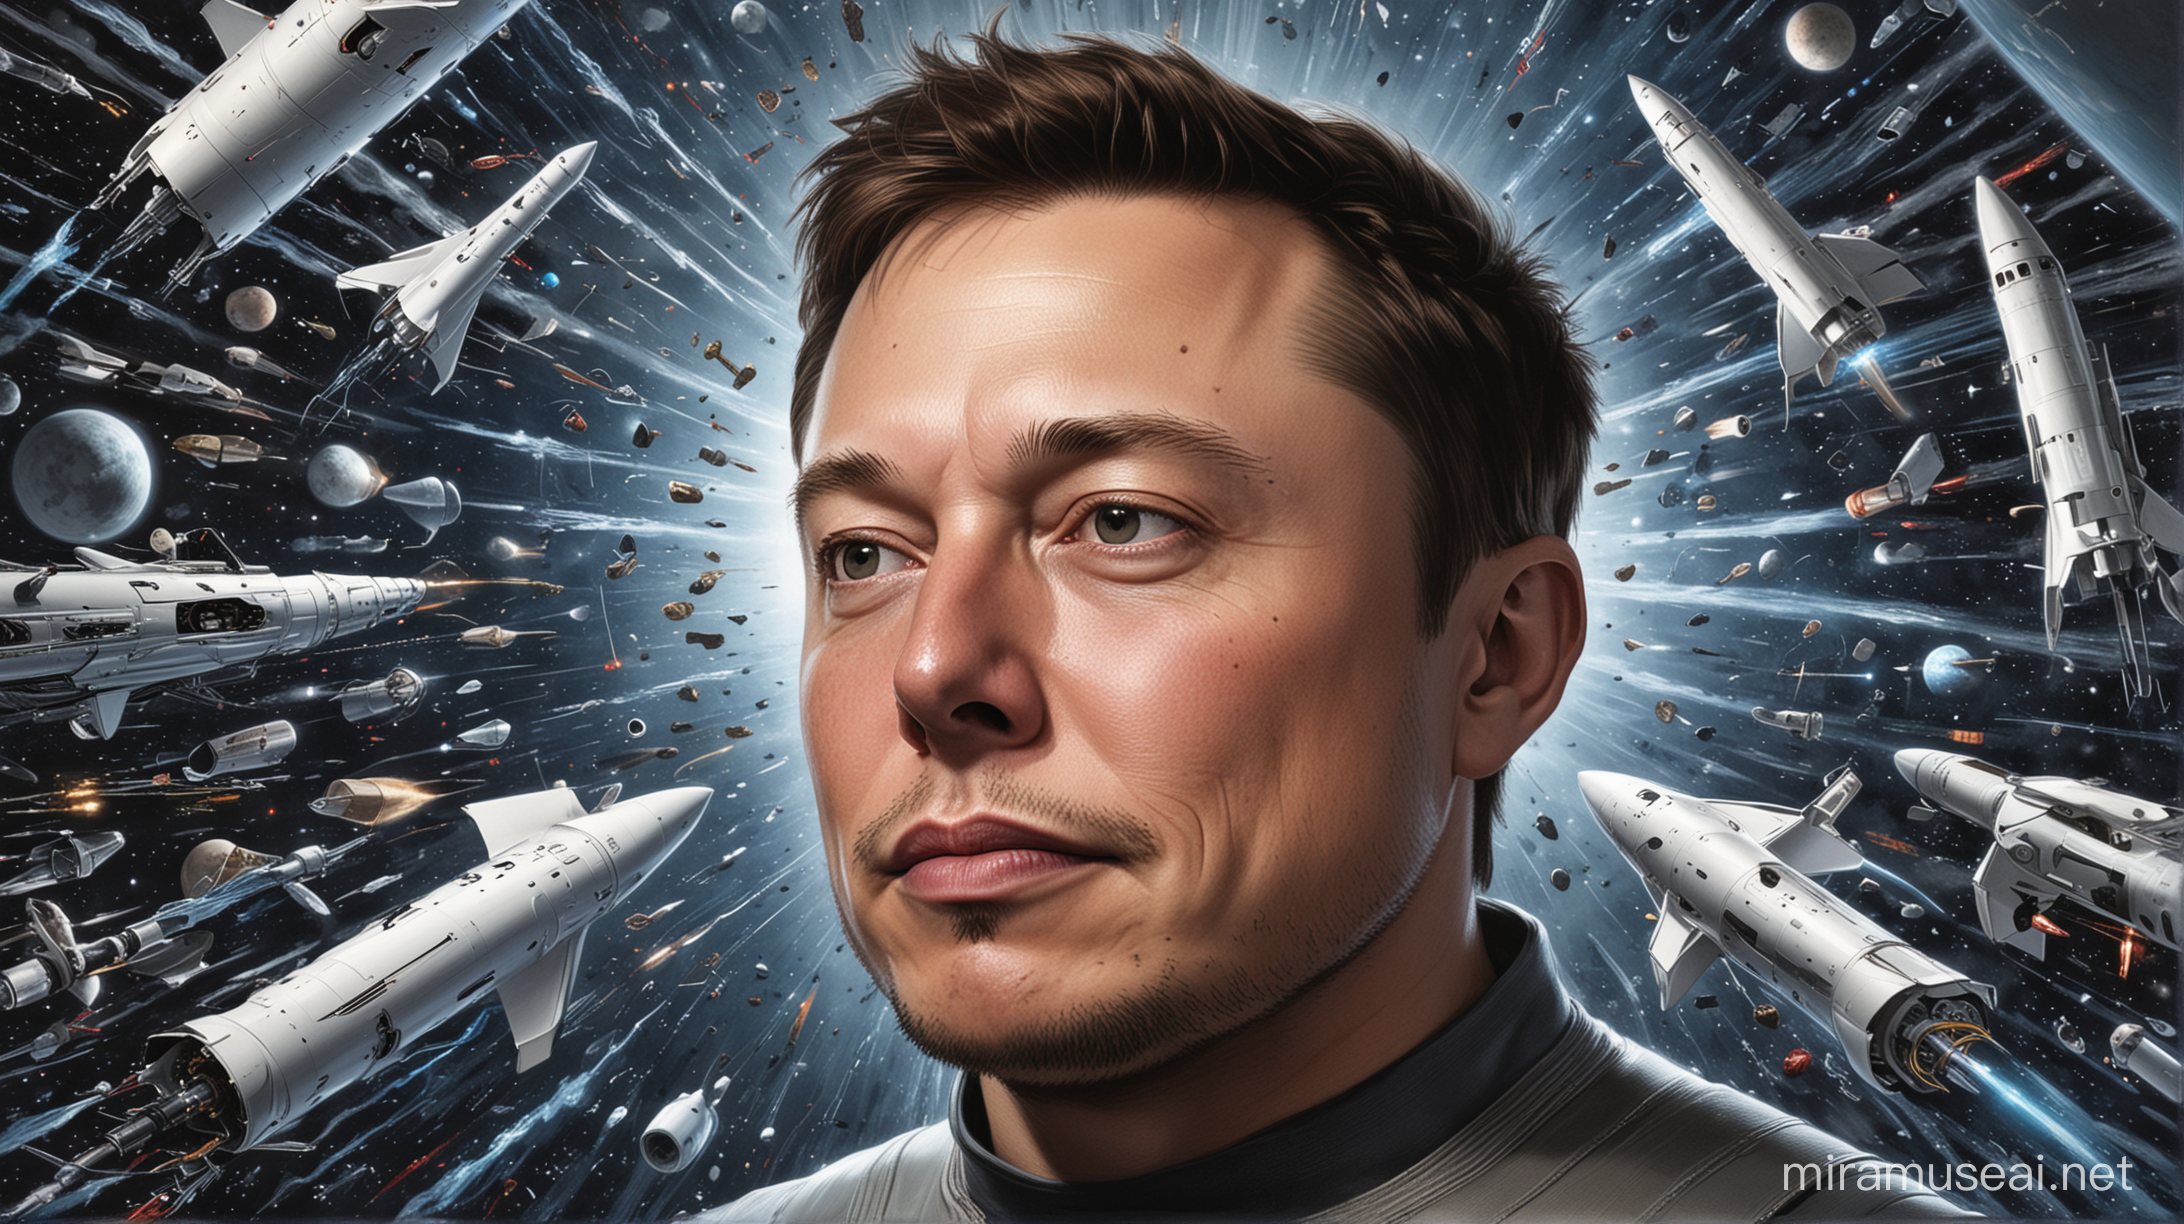 Elon Musk is depicted at the center of the illustration, immersed in thought, reflecting his visionary intellect. He gazes ahead with a discerning expression, embodying the essence of genius. To his left and right, SpaceX rockets and Neuralink chips are depicted, symbolizing his groundbreaking innovations in space exploration and neural technology. The composition captures Musk's profound contemplation and his pivotal role as a modern-day genius.